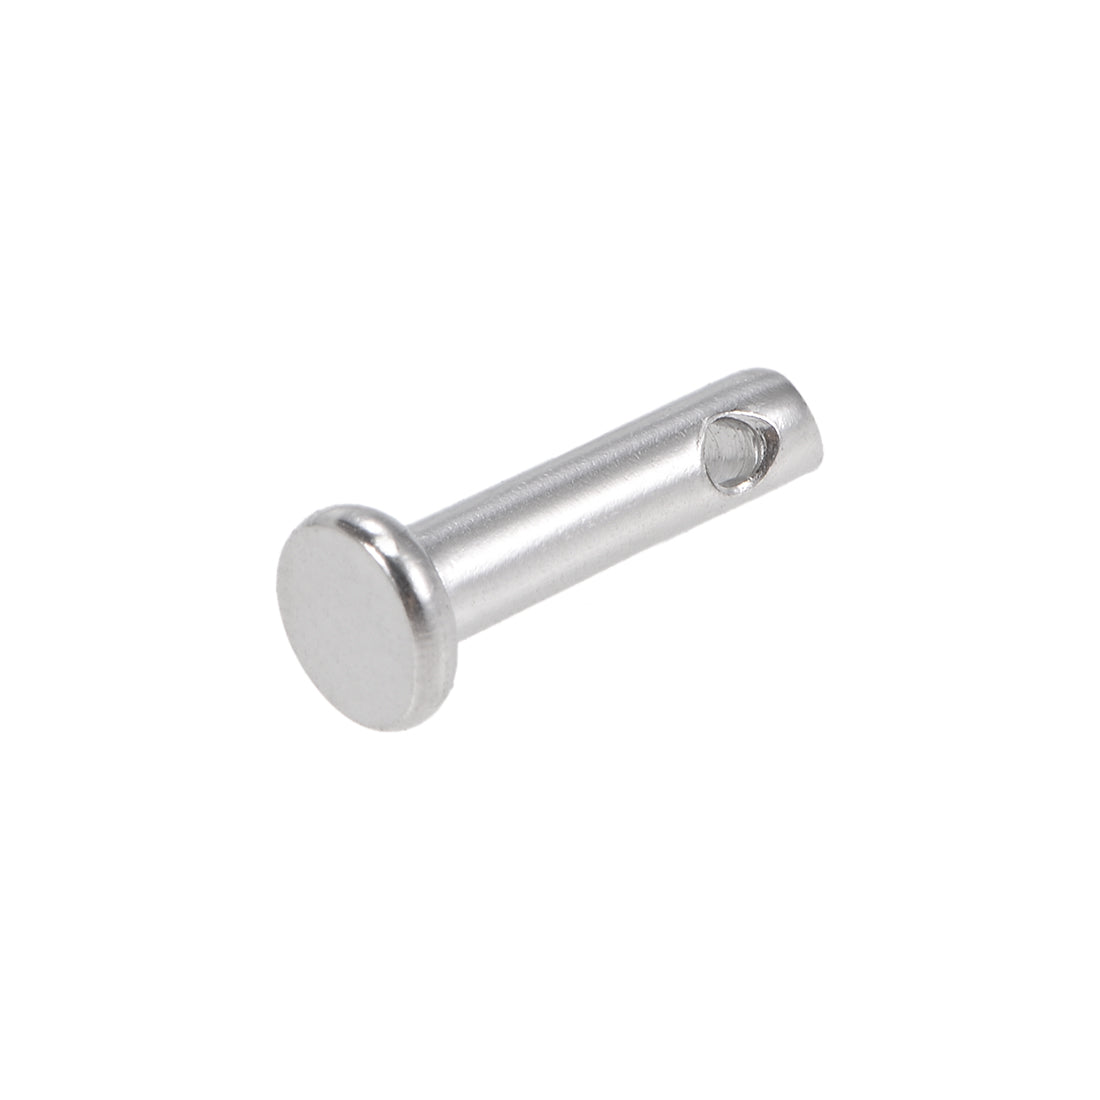 uxcell Uxcell Single Hole Clevis Pins - 3mm x 12mm Flat Head 304 Stainless Steel Link Hinge Pin 20Pcs